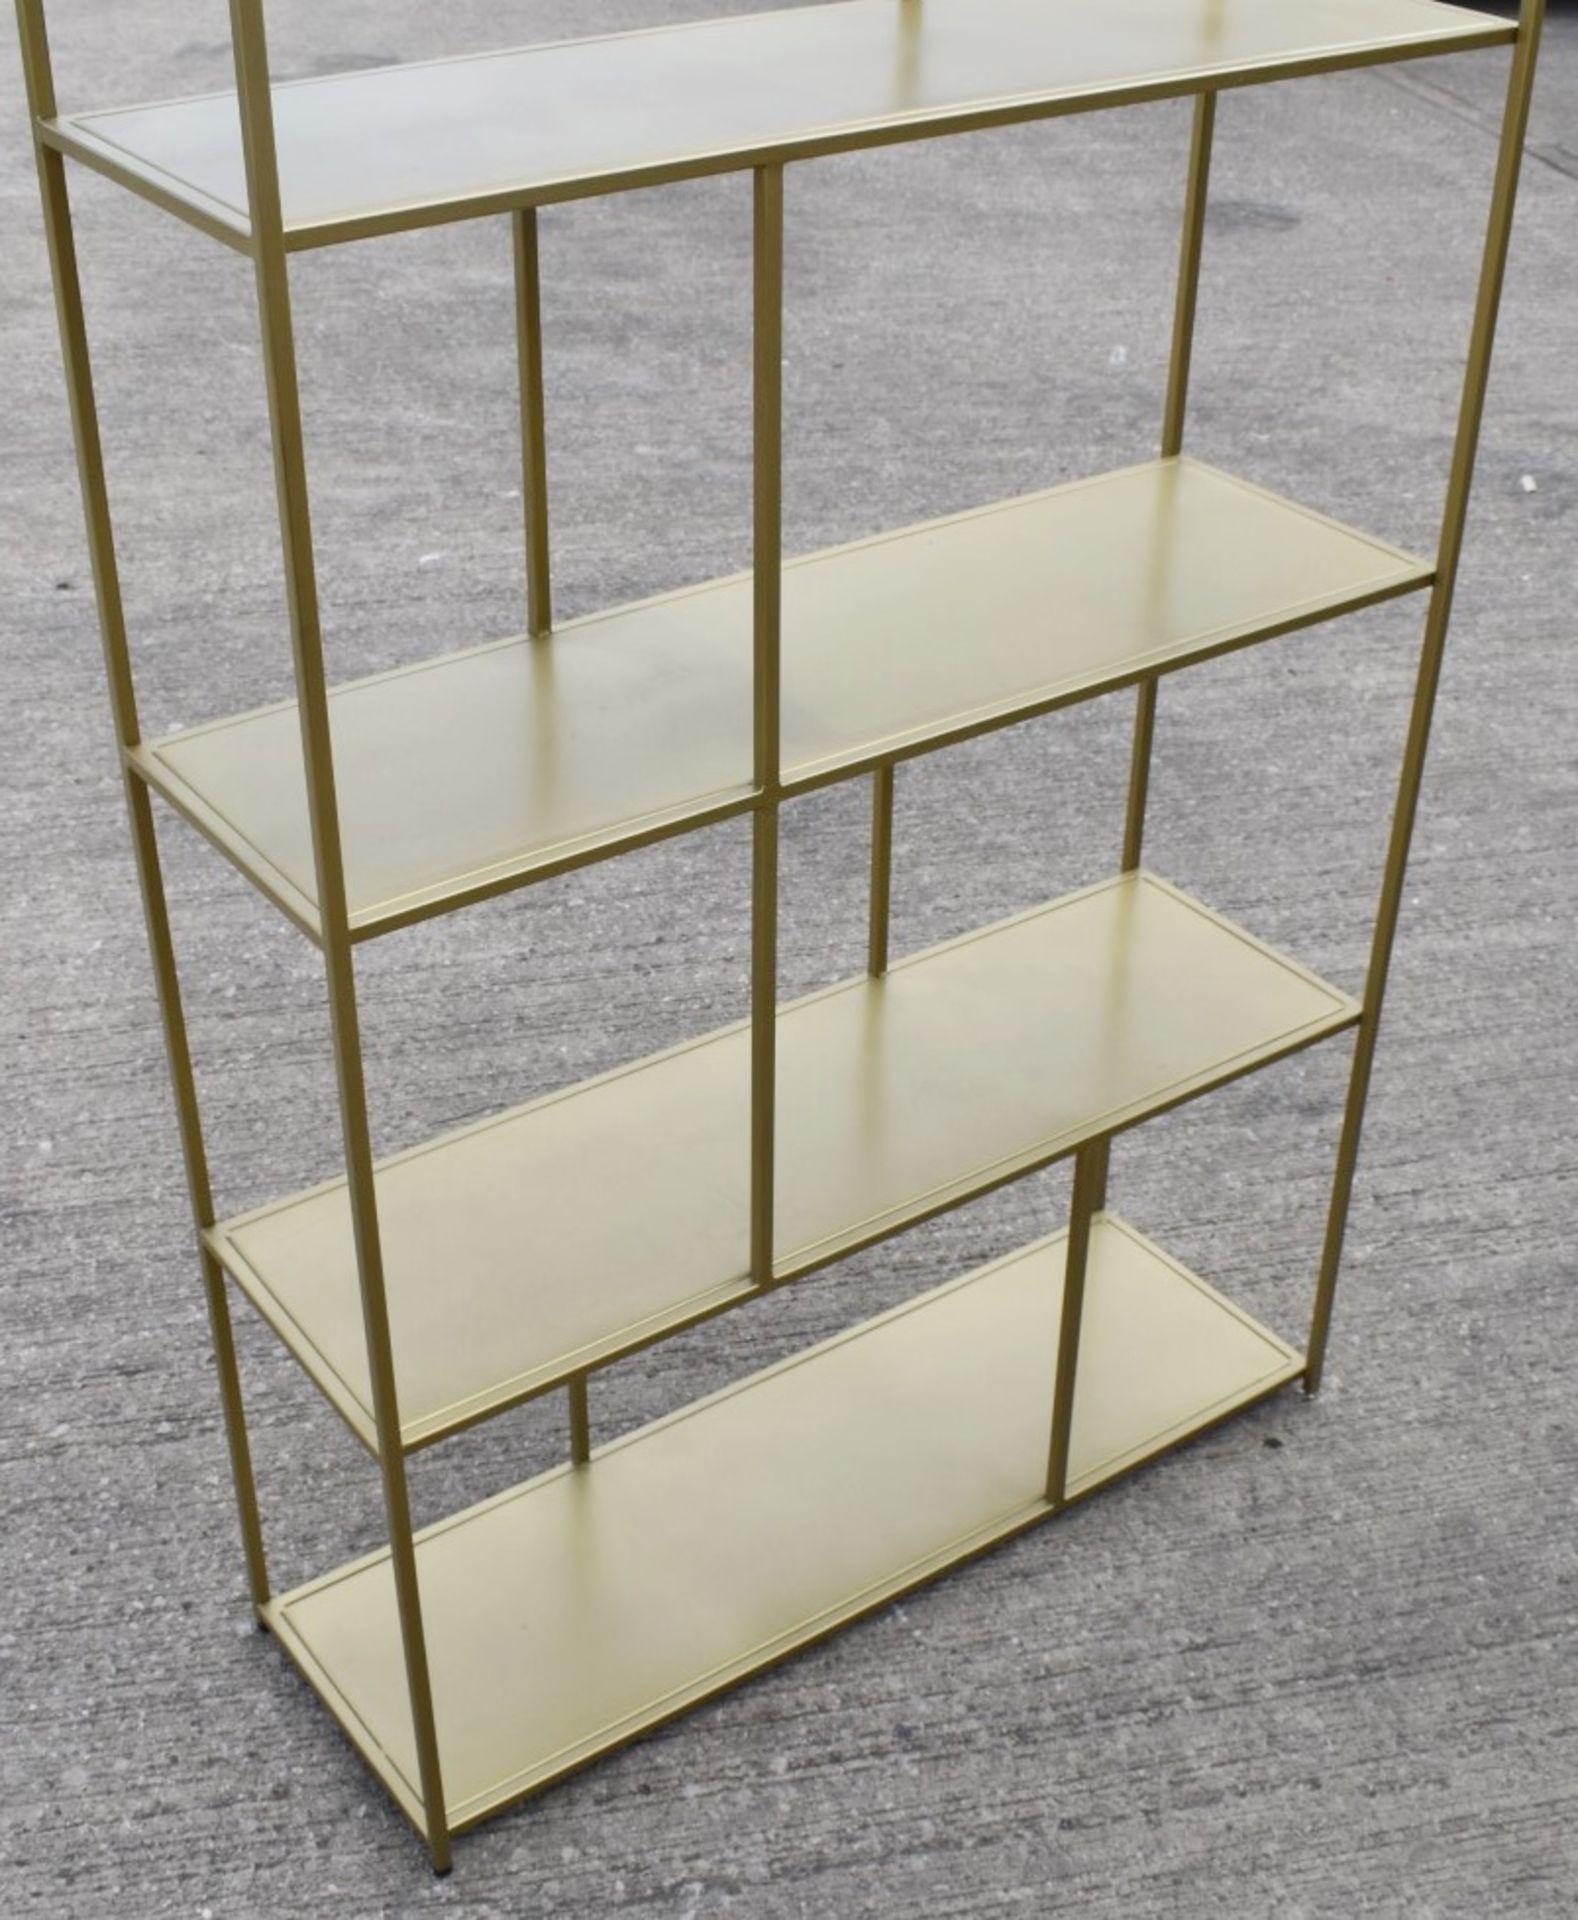 1 x SWOON 'Aero' Handcrafted Art Deco Inspired Book Case Shelving Unit - Original Price £599.00 - Image 5 of 7